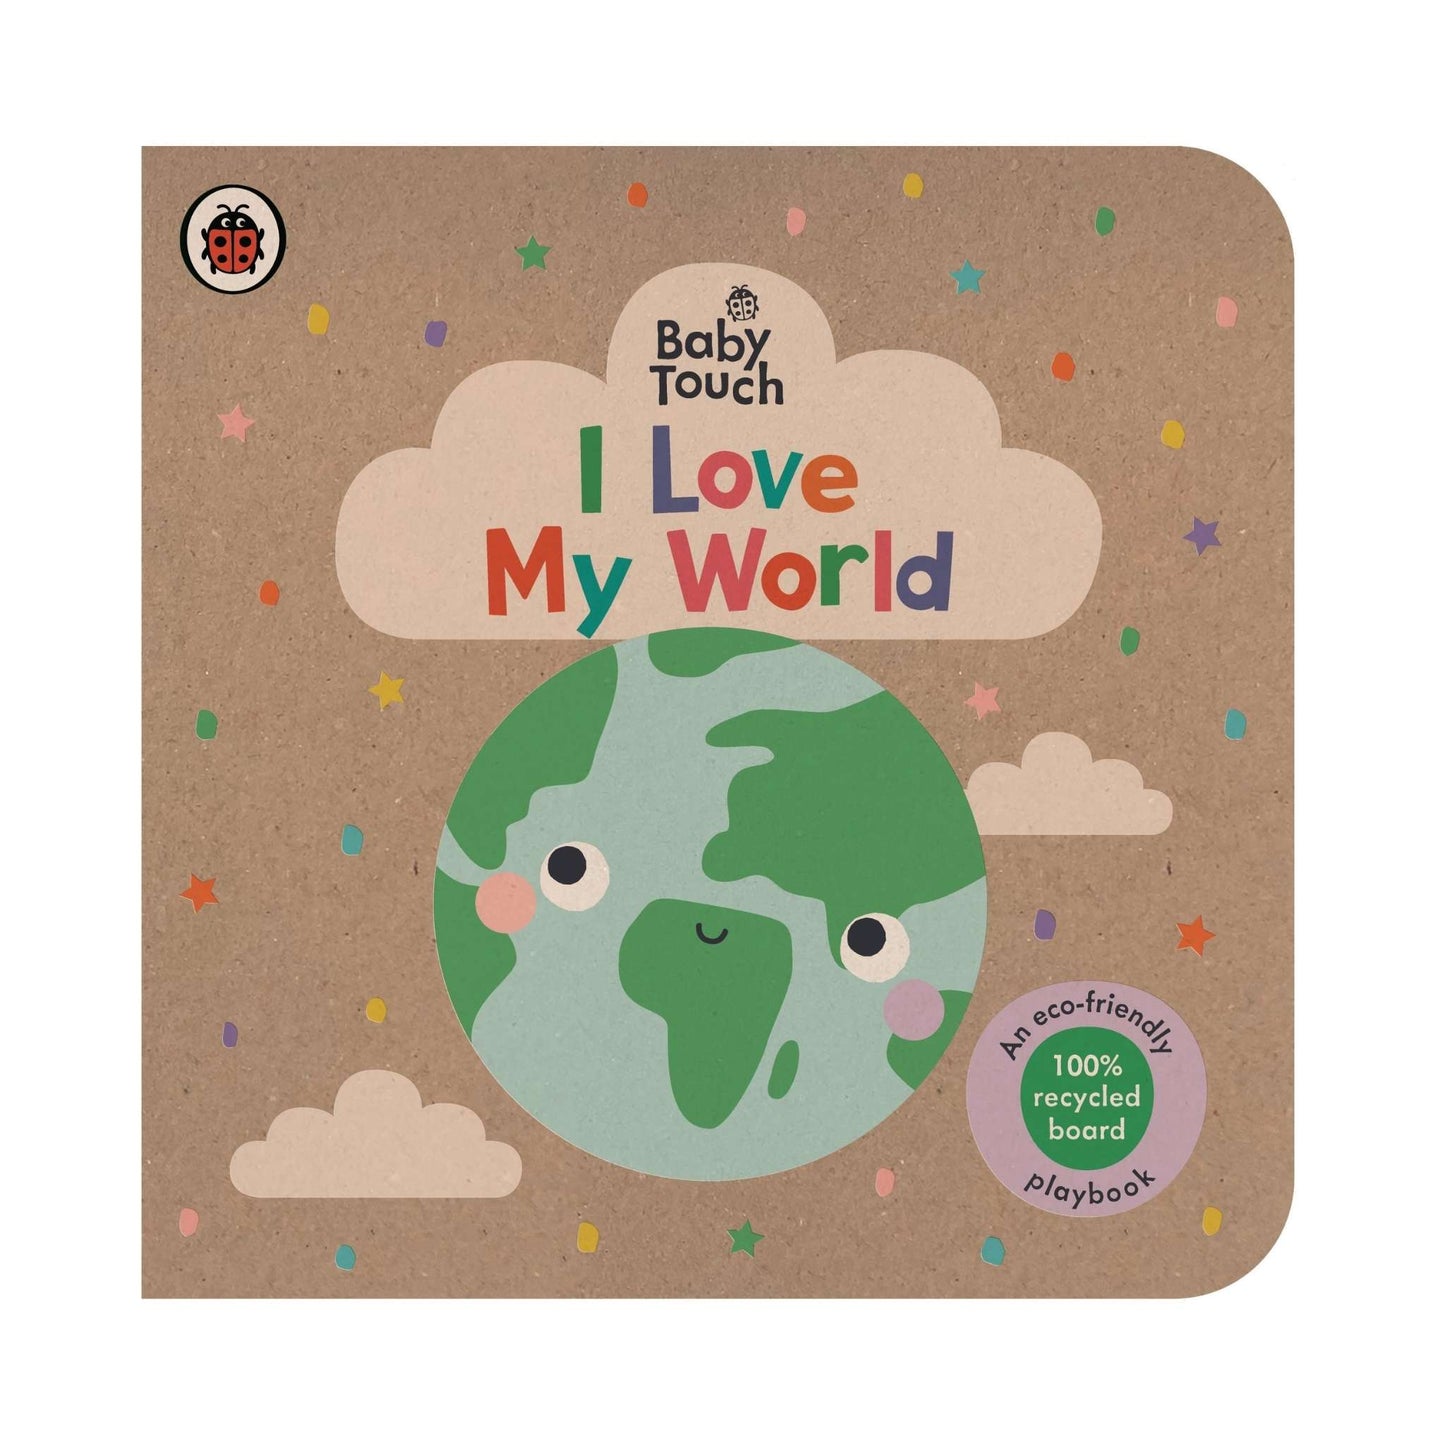 Our Bookshelf Baby I Love My World - Baby Touch Book - Ladybird